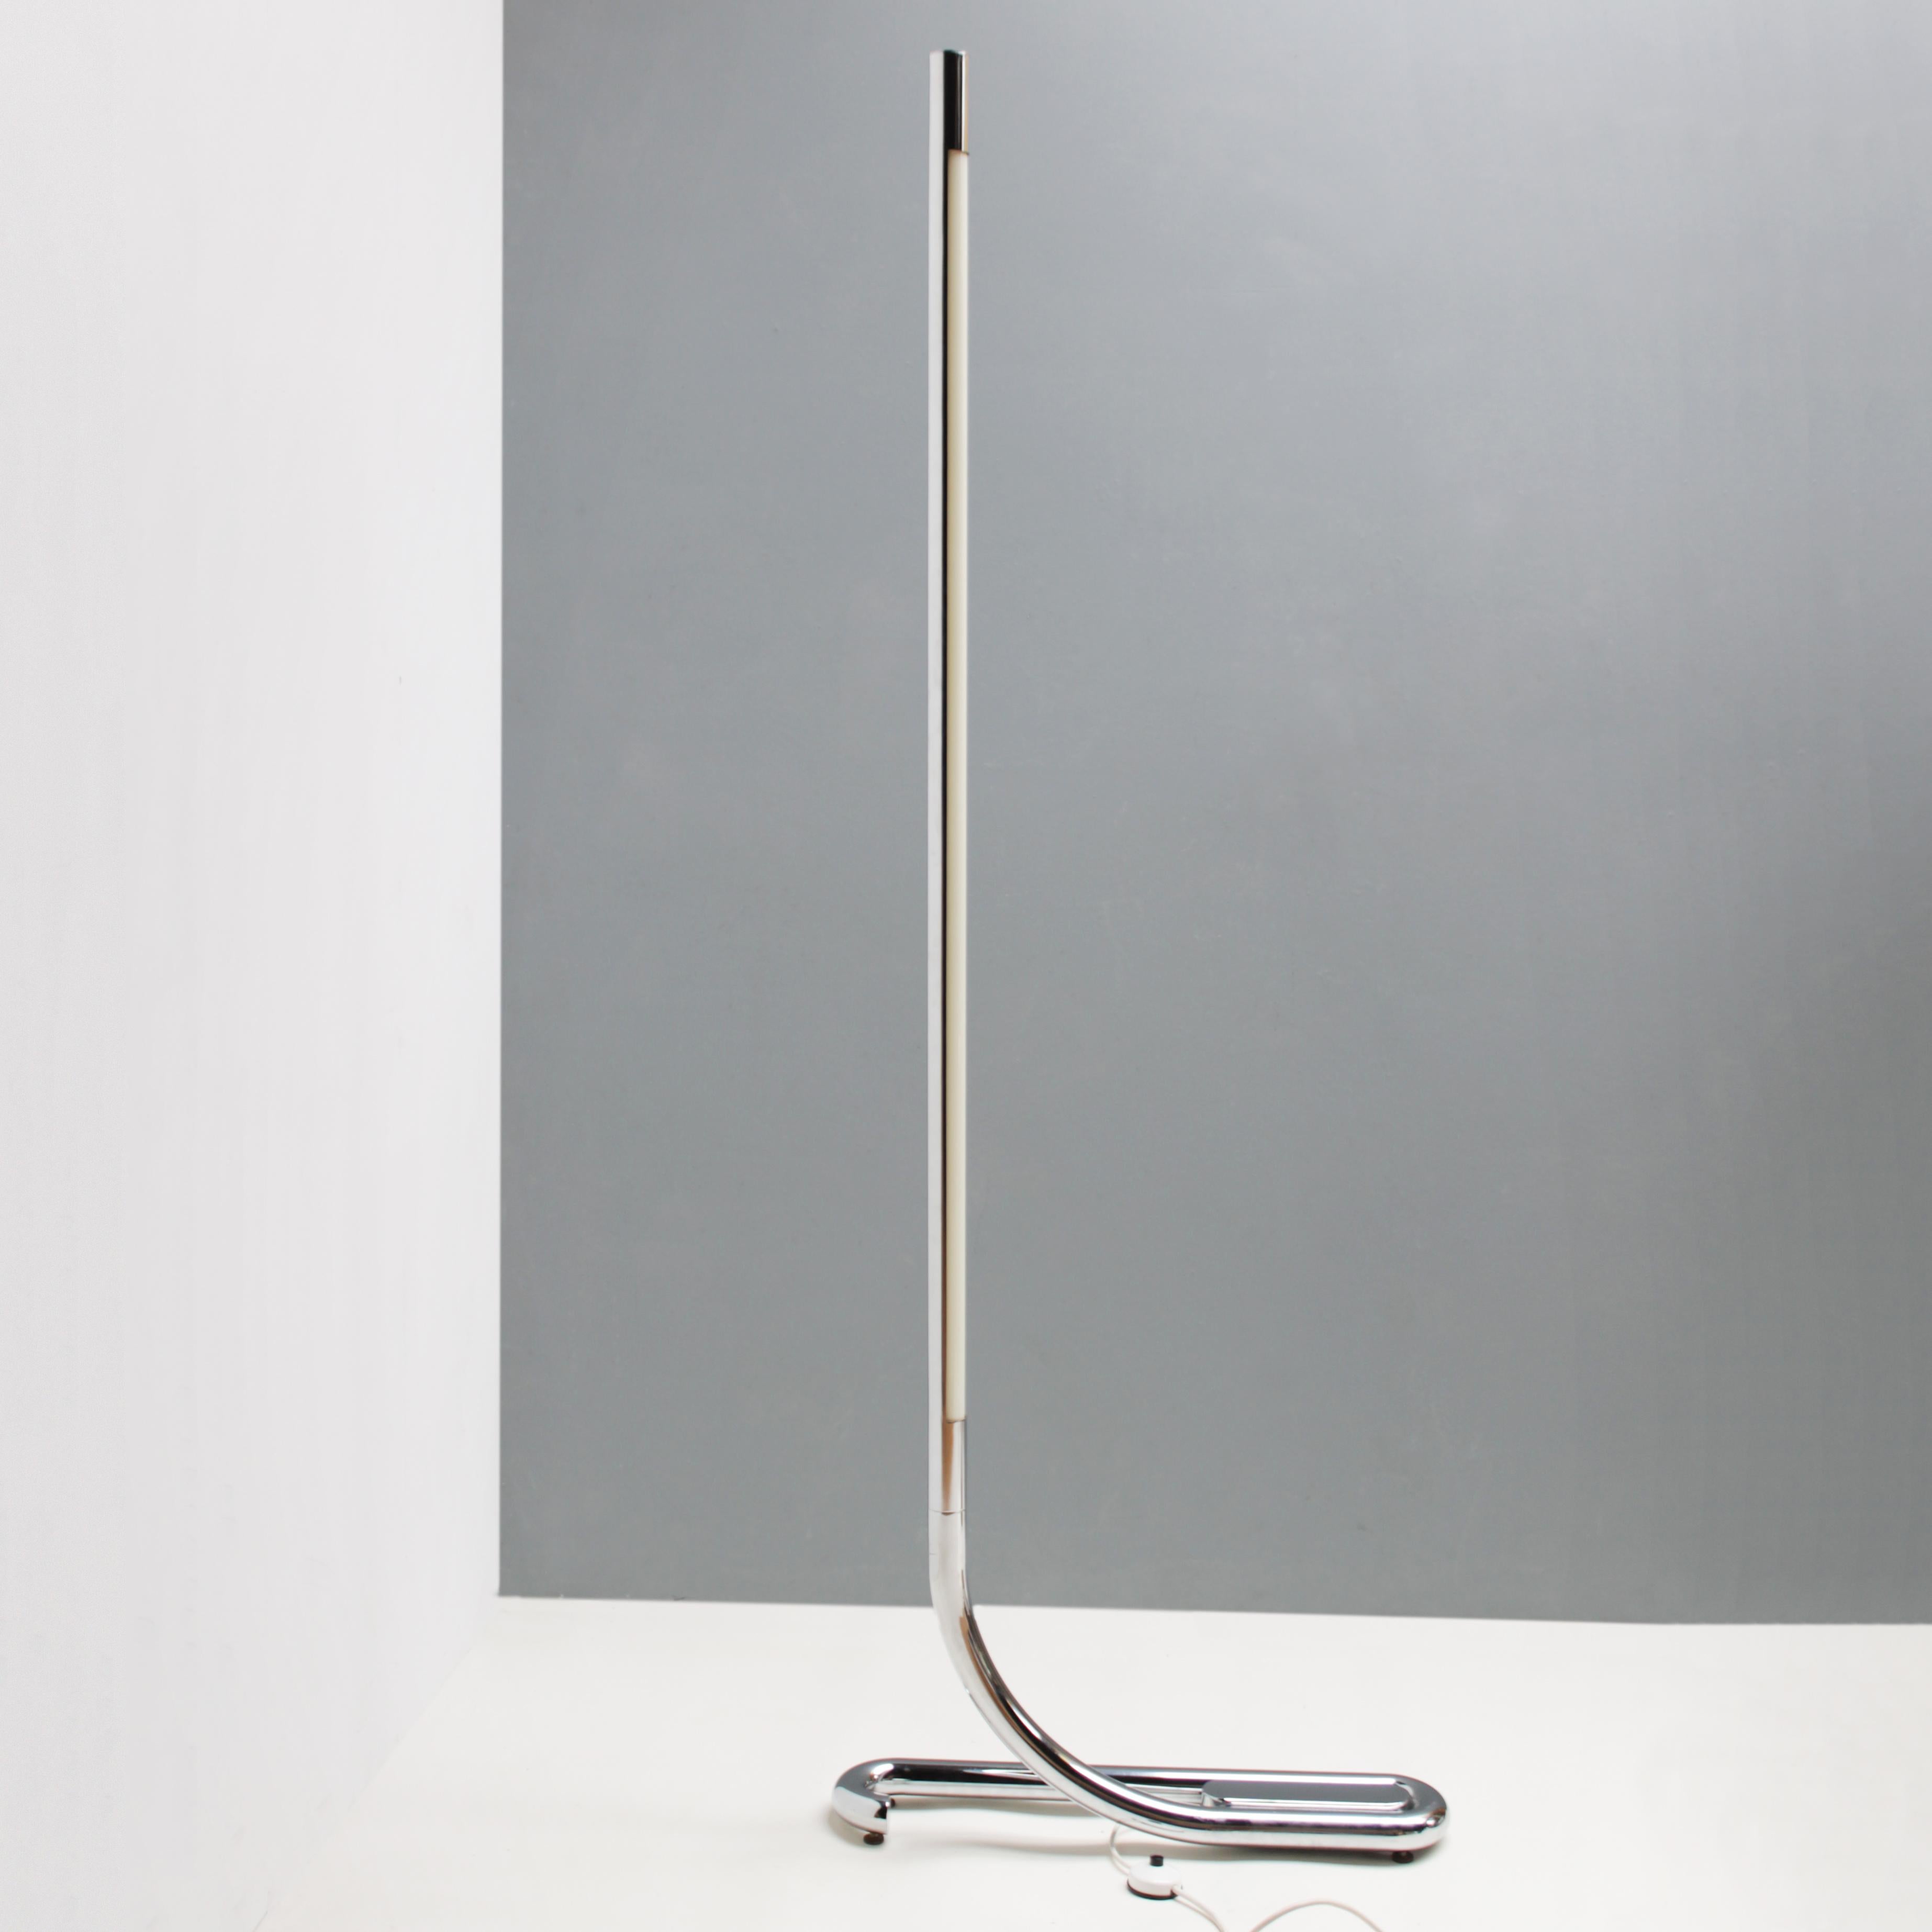 Rare floor lamp TC2 by Aldo van den Nieuwelaar, Holland 1972. Executed in chrome with a fluorescent tube.
Dimensions: Height 77.6 in. (197 cm), width 28.4 in. (72 cm), depth 5.9 in. (15 cm).

The production run of this particular model, called,